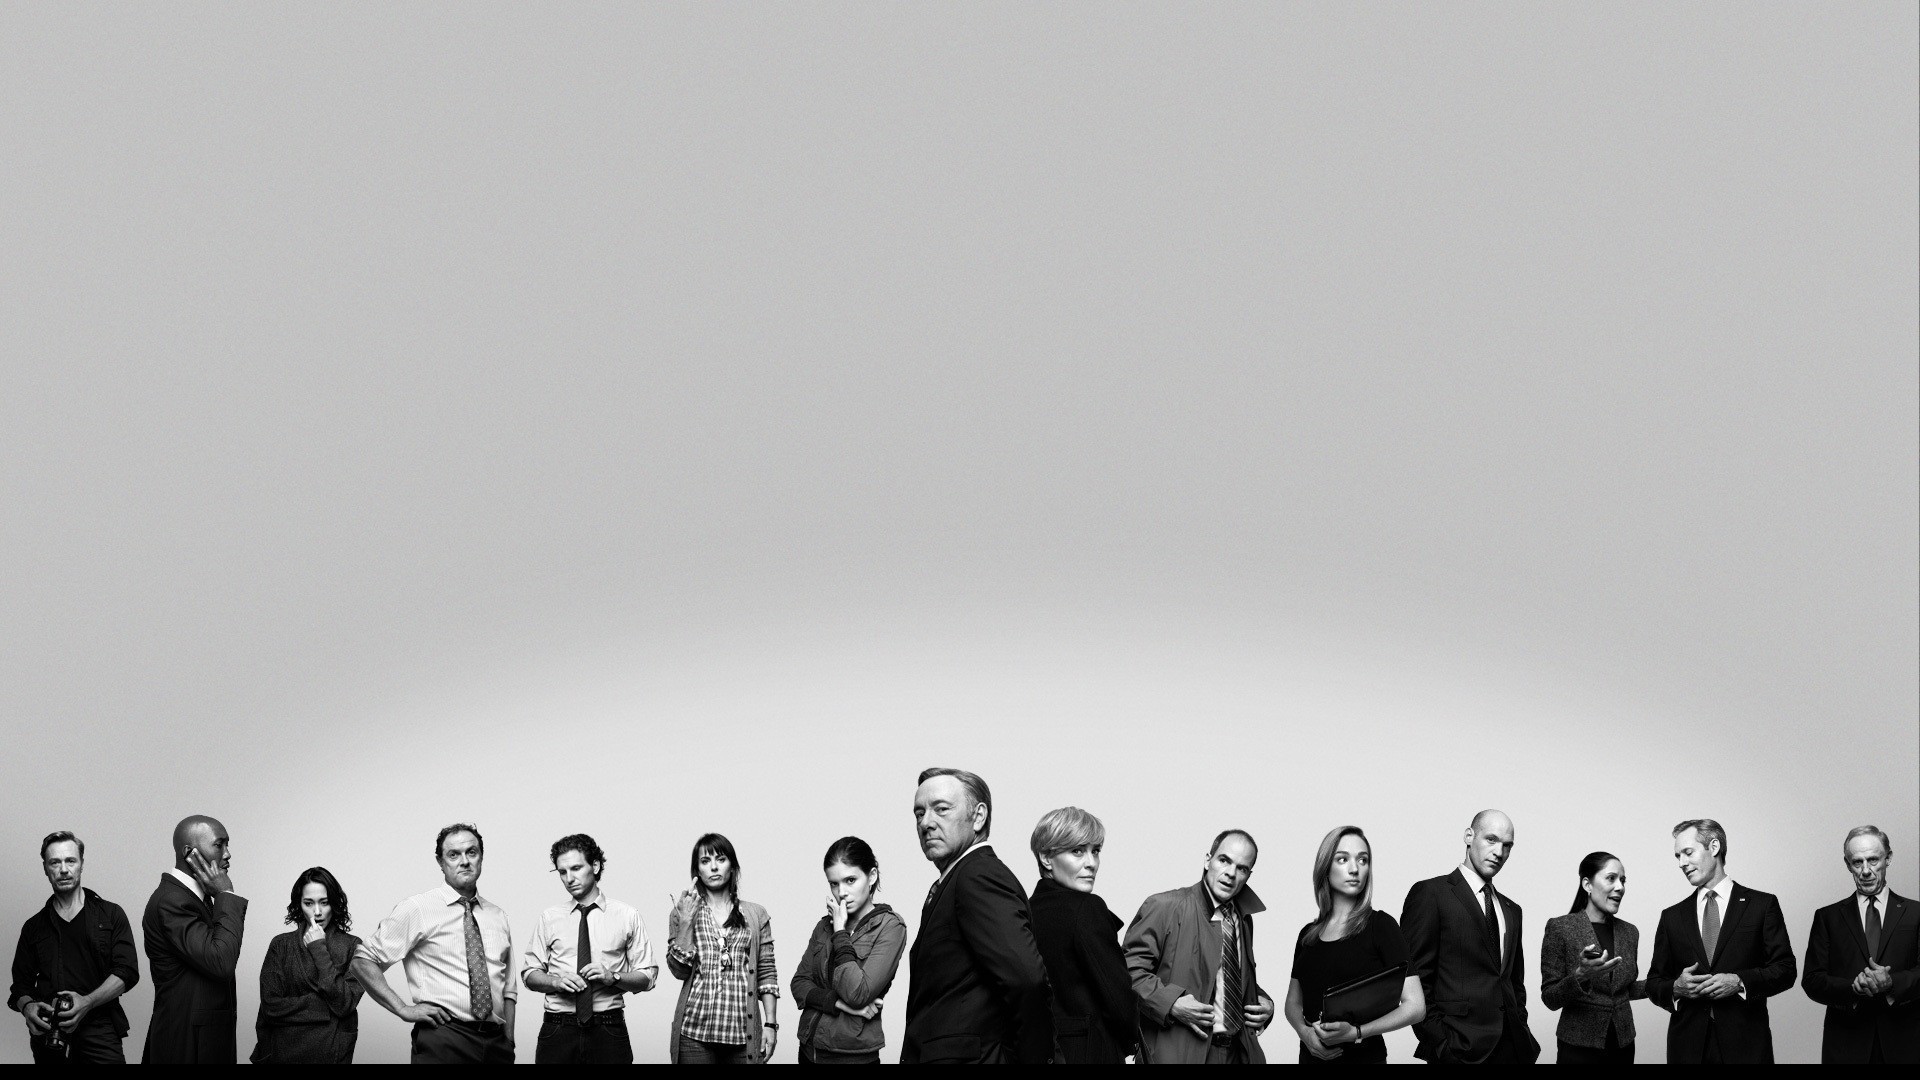 Kevin Spacey House Of Cards Wallpaper The Art Mad